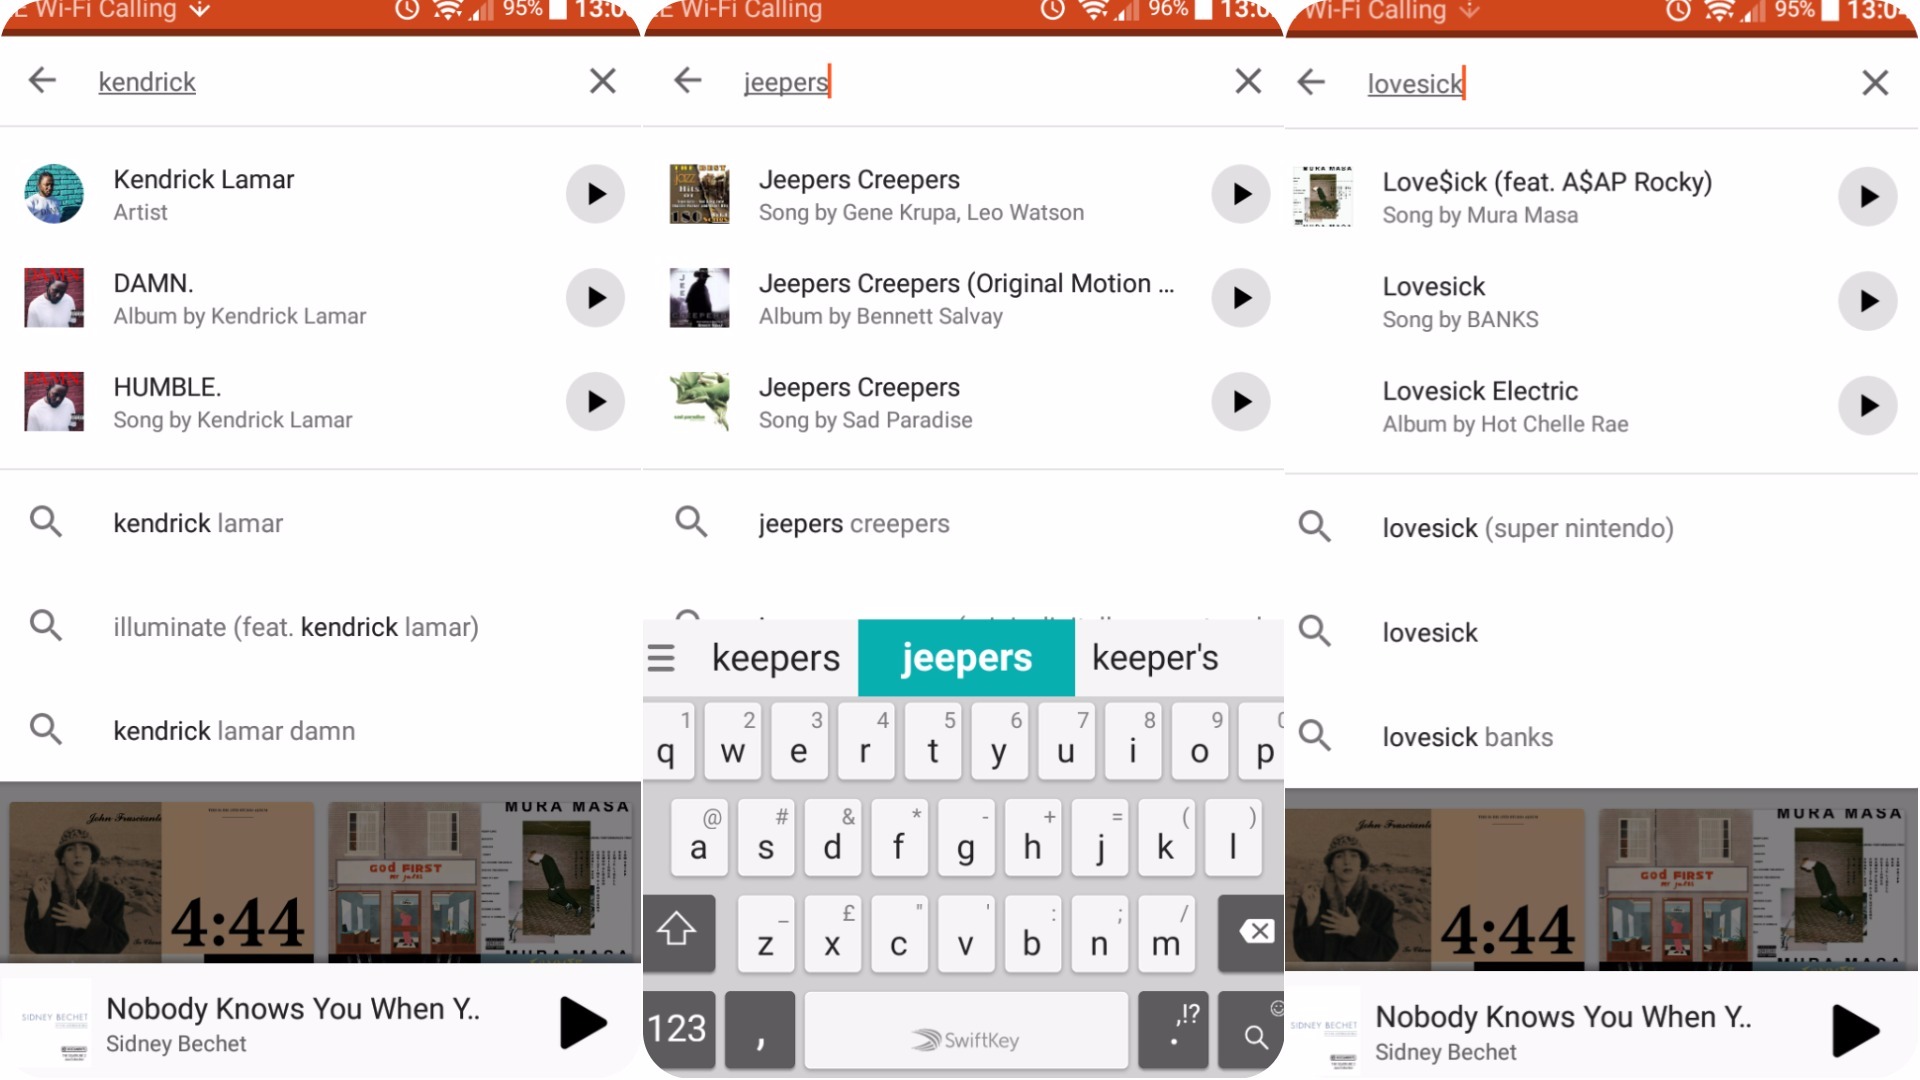 Google Play Music make playing music even easier with enhanced search